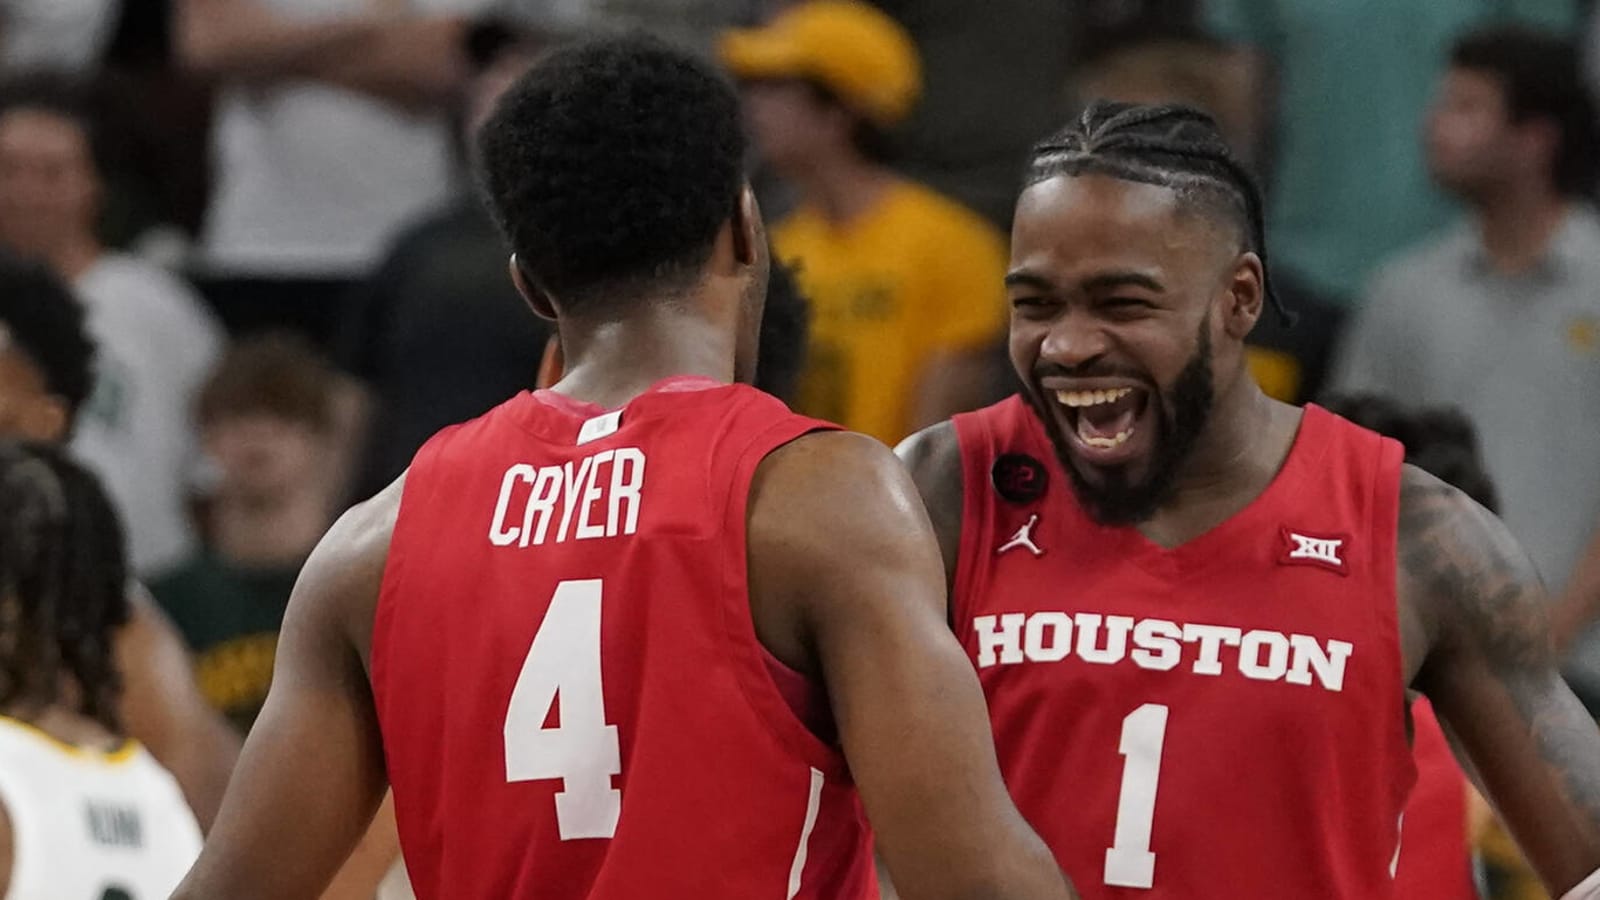 Houston gets the job done, Wake Forest proves what was already known